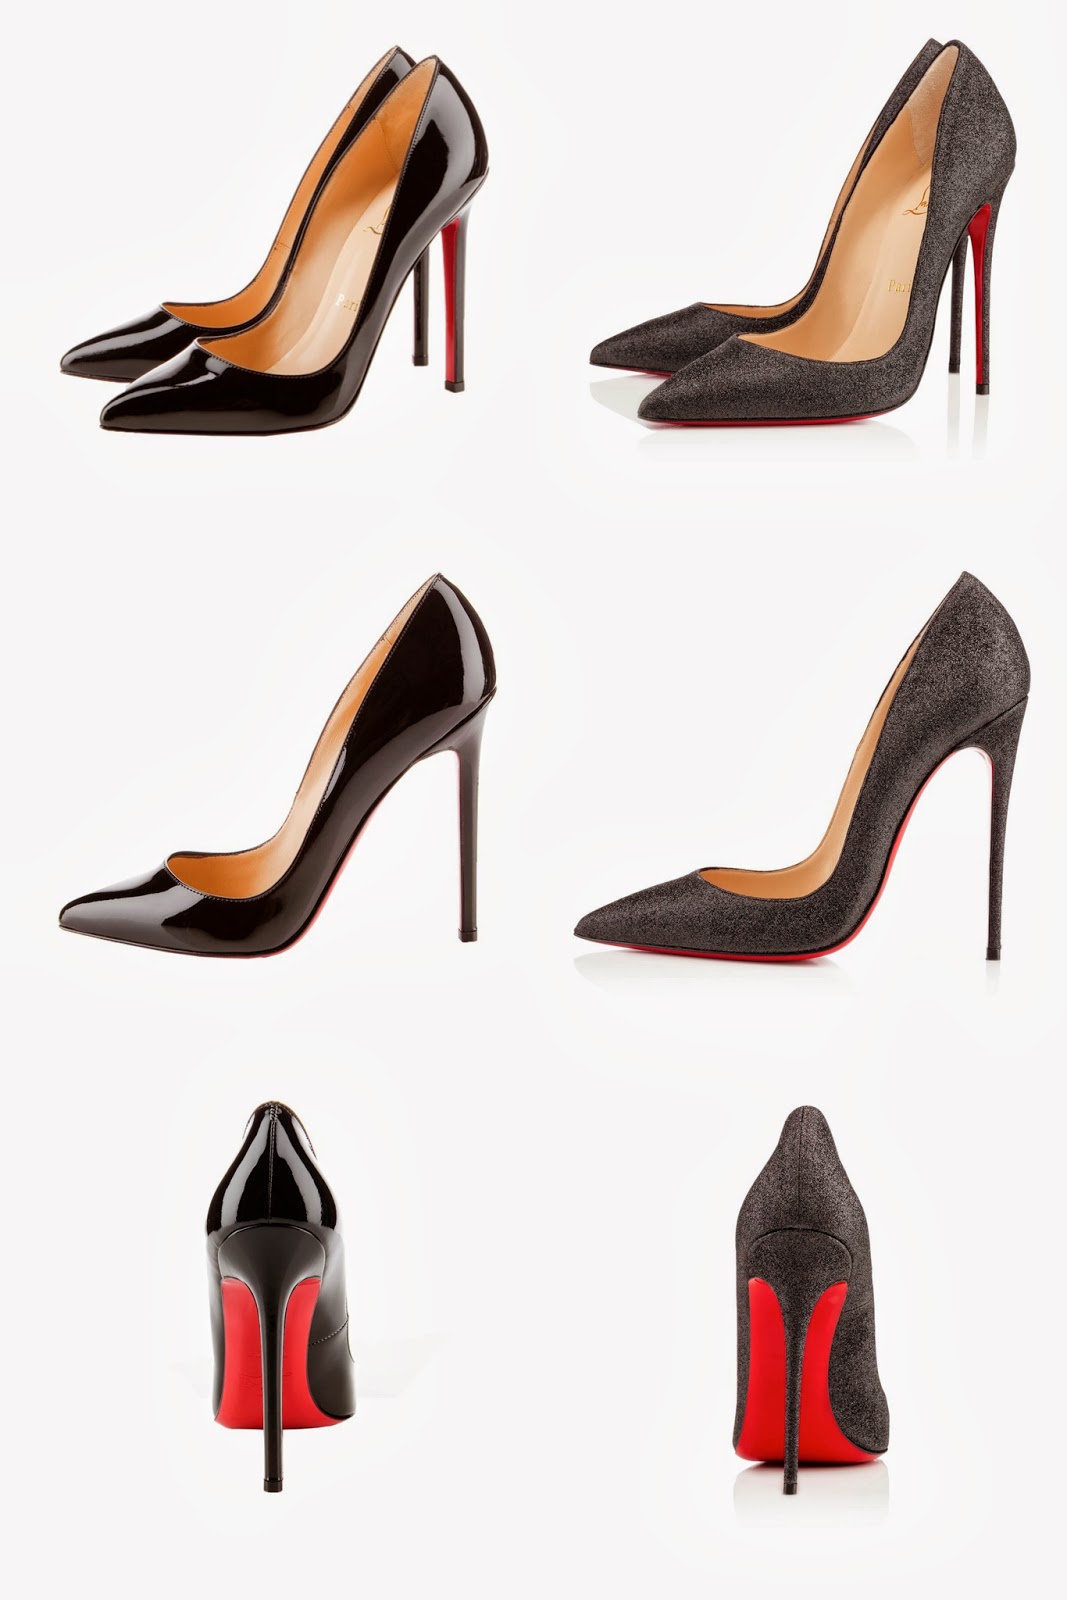 Christian Louboutin So Kate vs. Pigalle by a Fashion Blogger